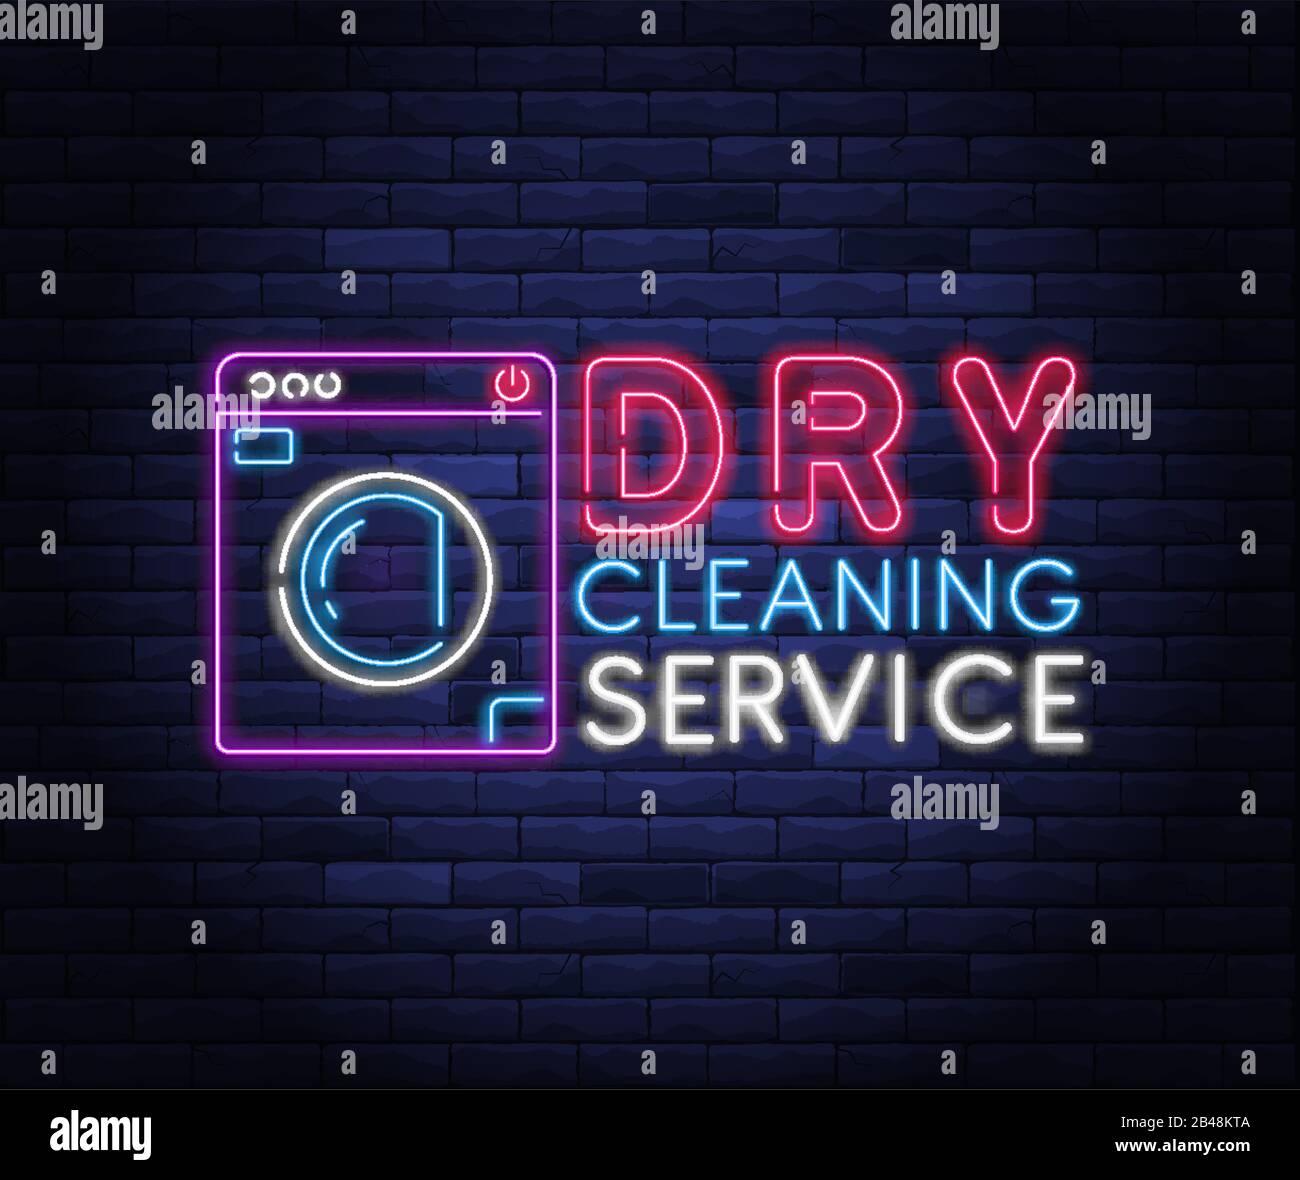 Dry cleaning service neon banner Stock Vector